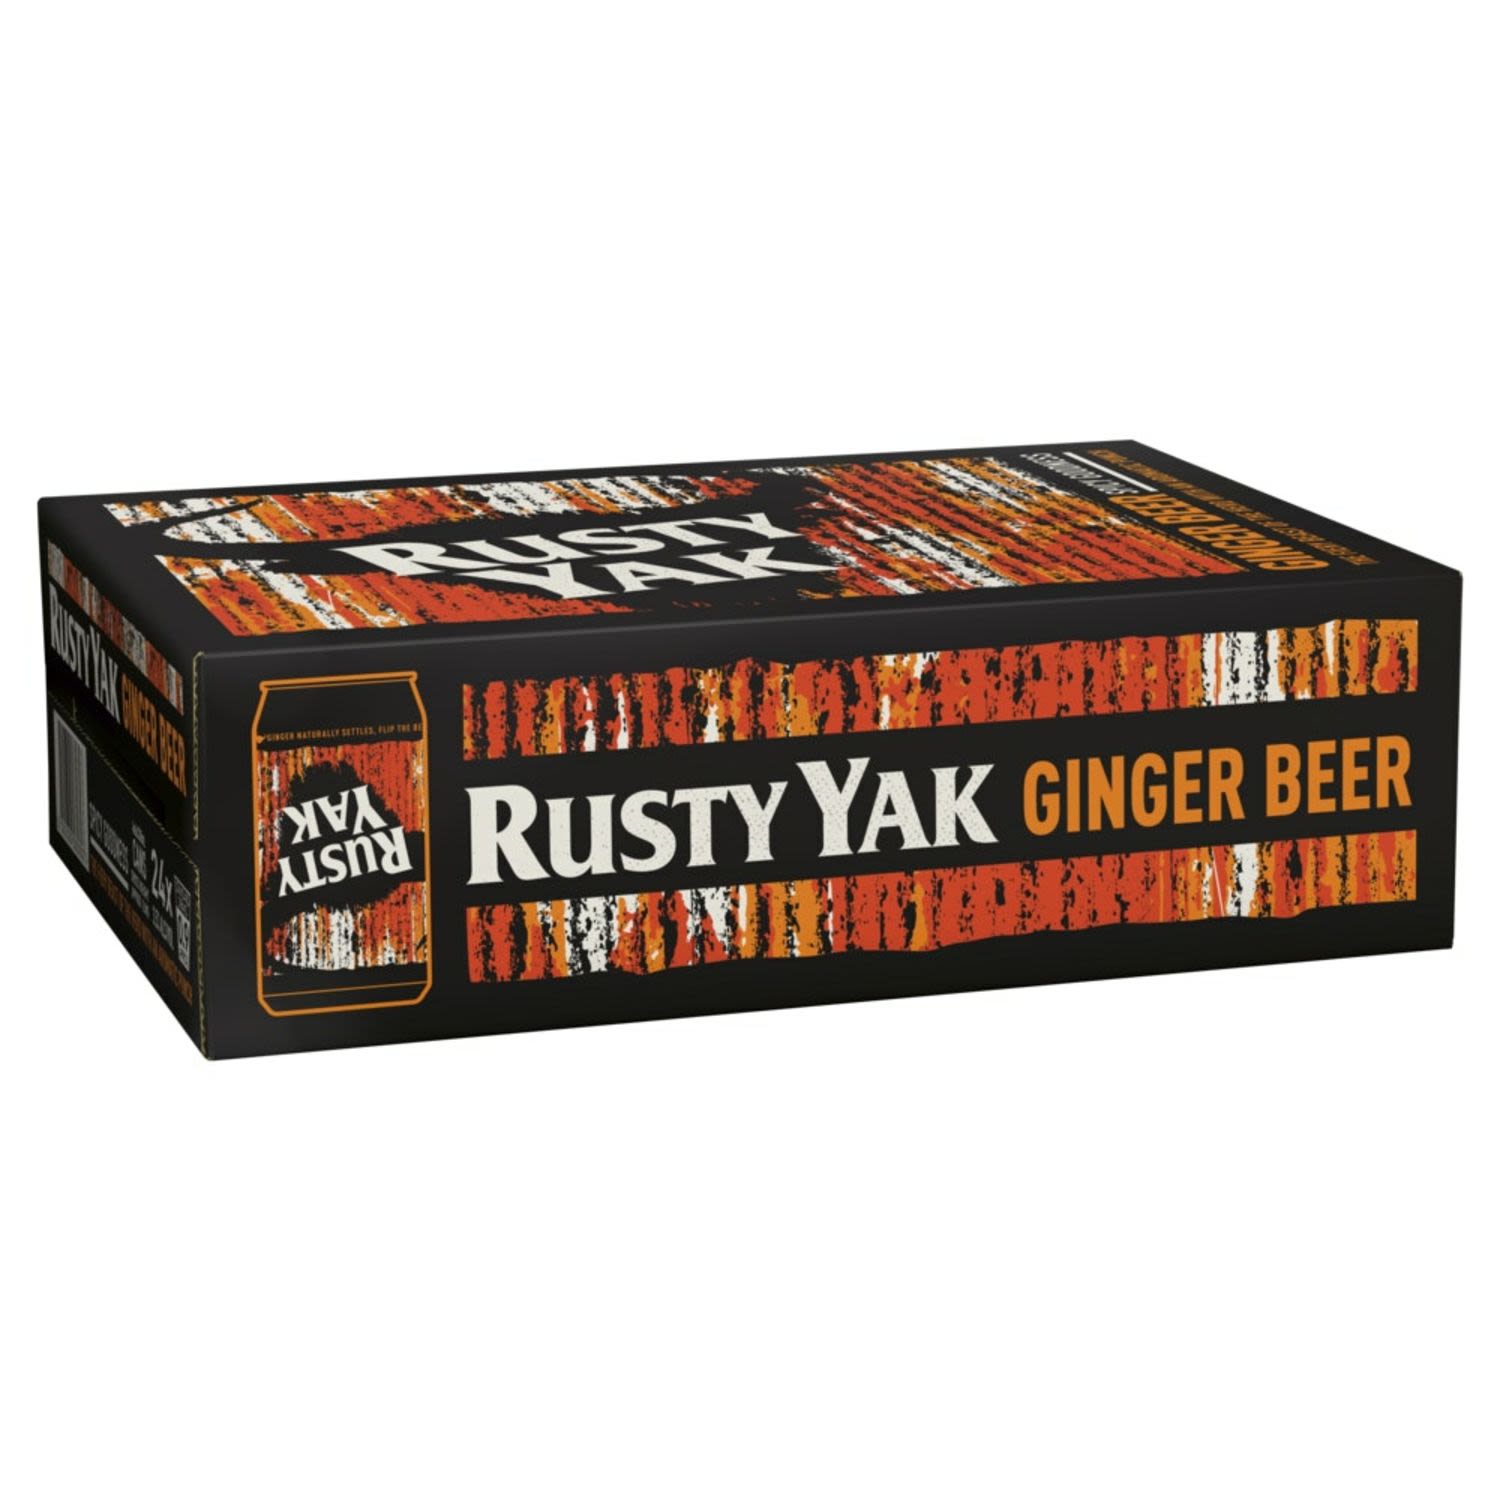 As with any family, some characters don’t fit inside the box. The fiery beast of the herd. Packed with an aromatic ginger punch that delivers a great tasting, refreshing finish.<br /> <br />Alcohol Volume: 3.50%<br /><br />Pack Format: 24 Pack<br /><br />Standard Drinks: 0.9</br /><br />Pack Type: Can<br /><br />Country of Origin: Australia<br />